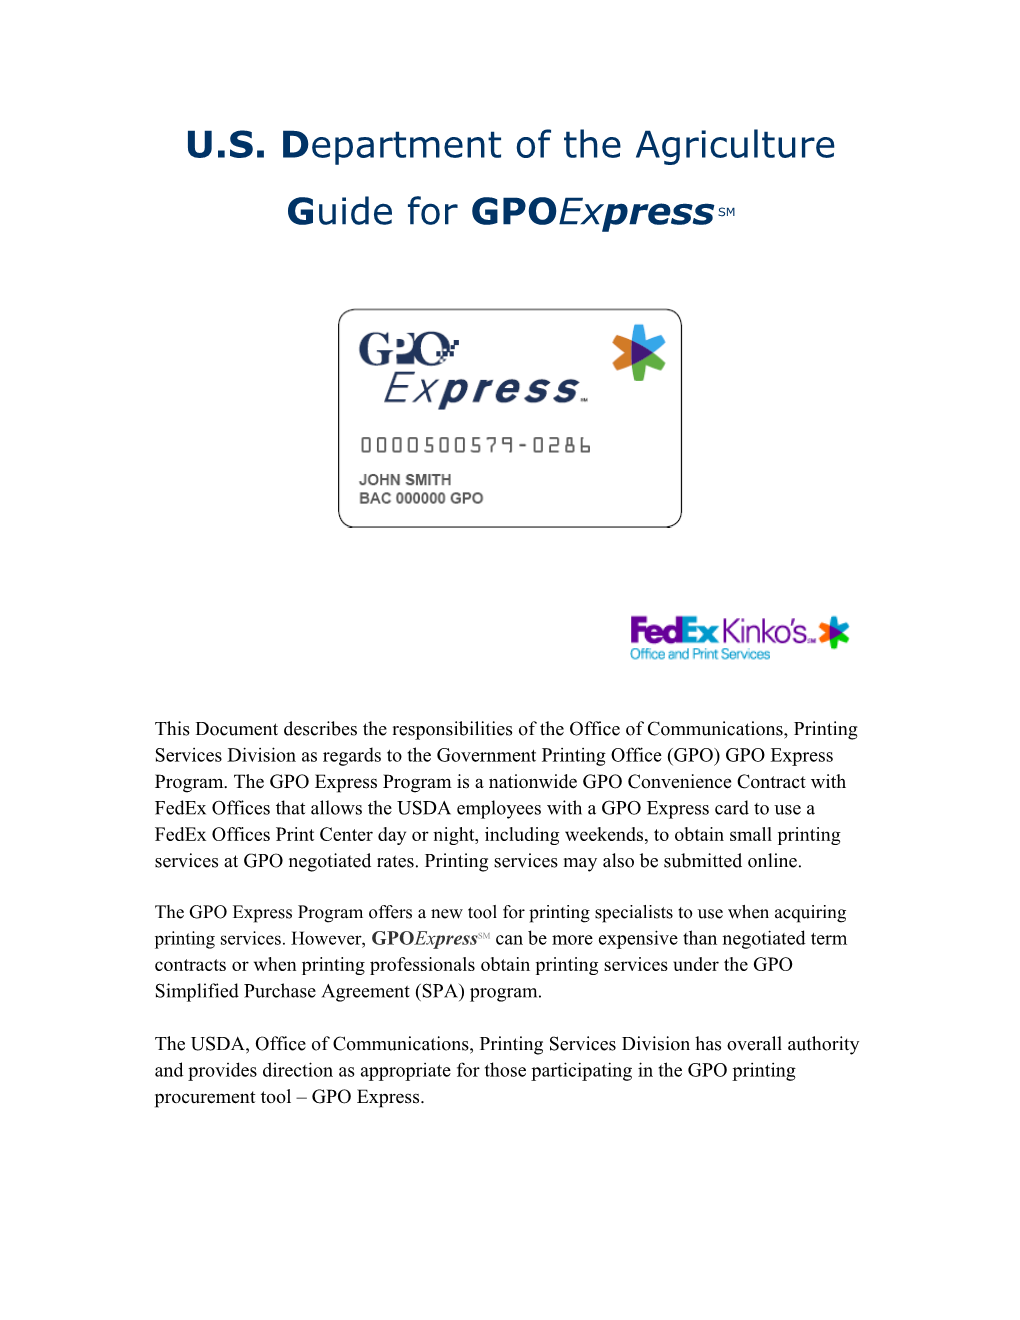 USDA S Policy on Purchasing GPOEXPRESS Cards Using Your Government Purchase Cards (VISA)